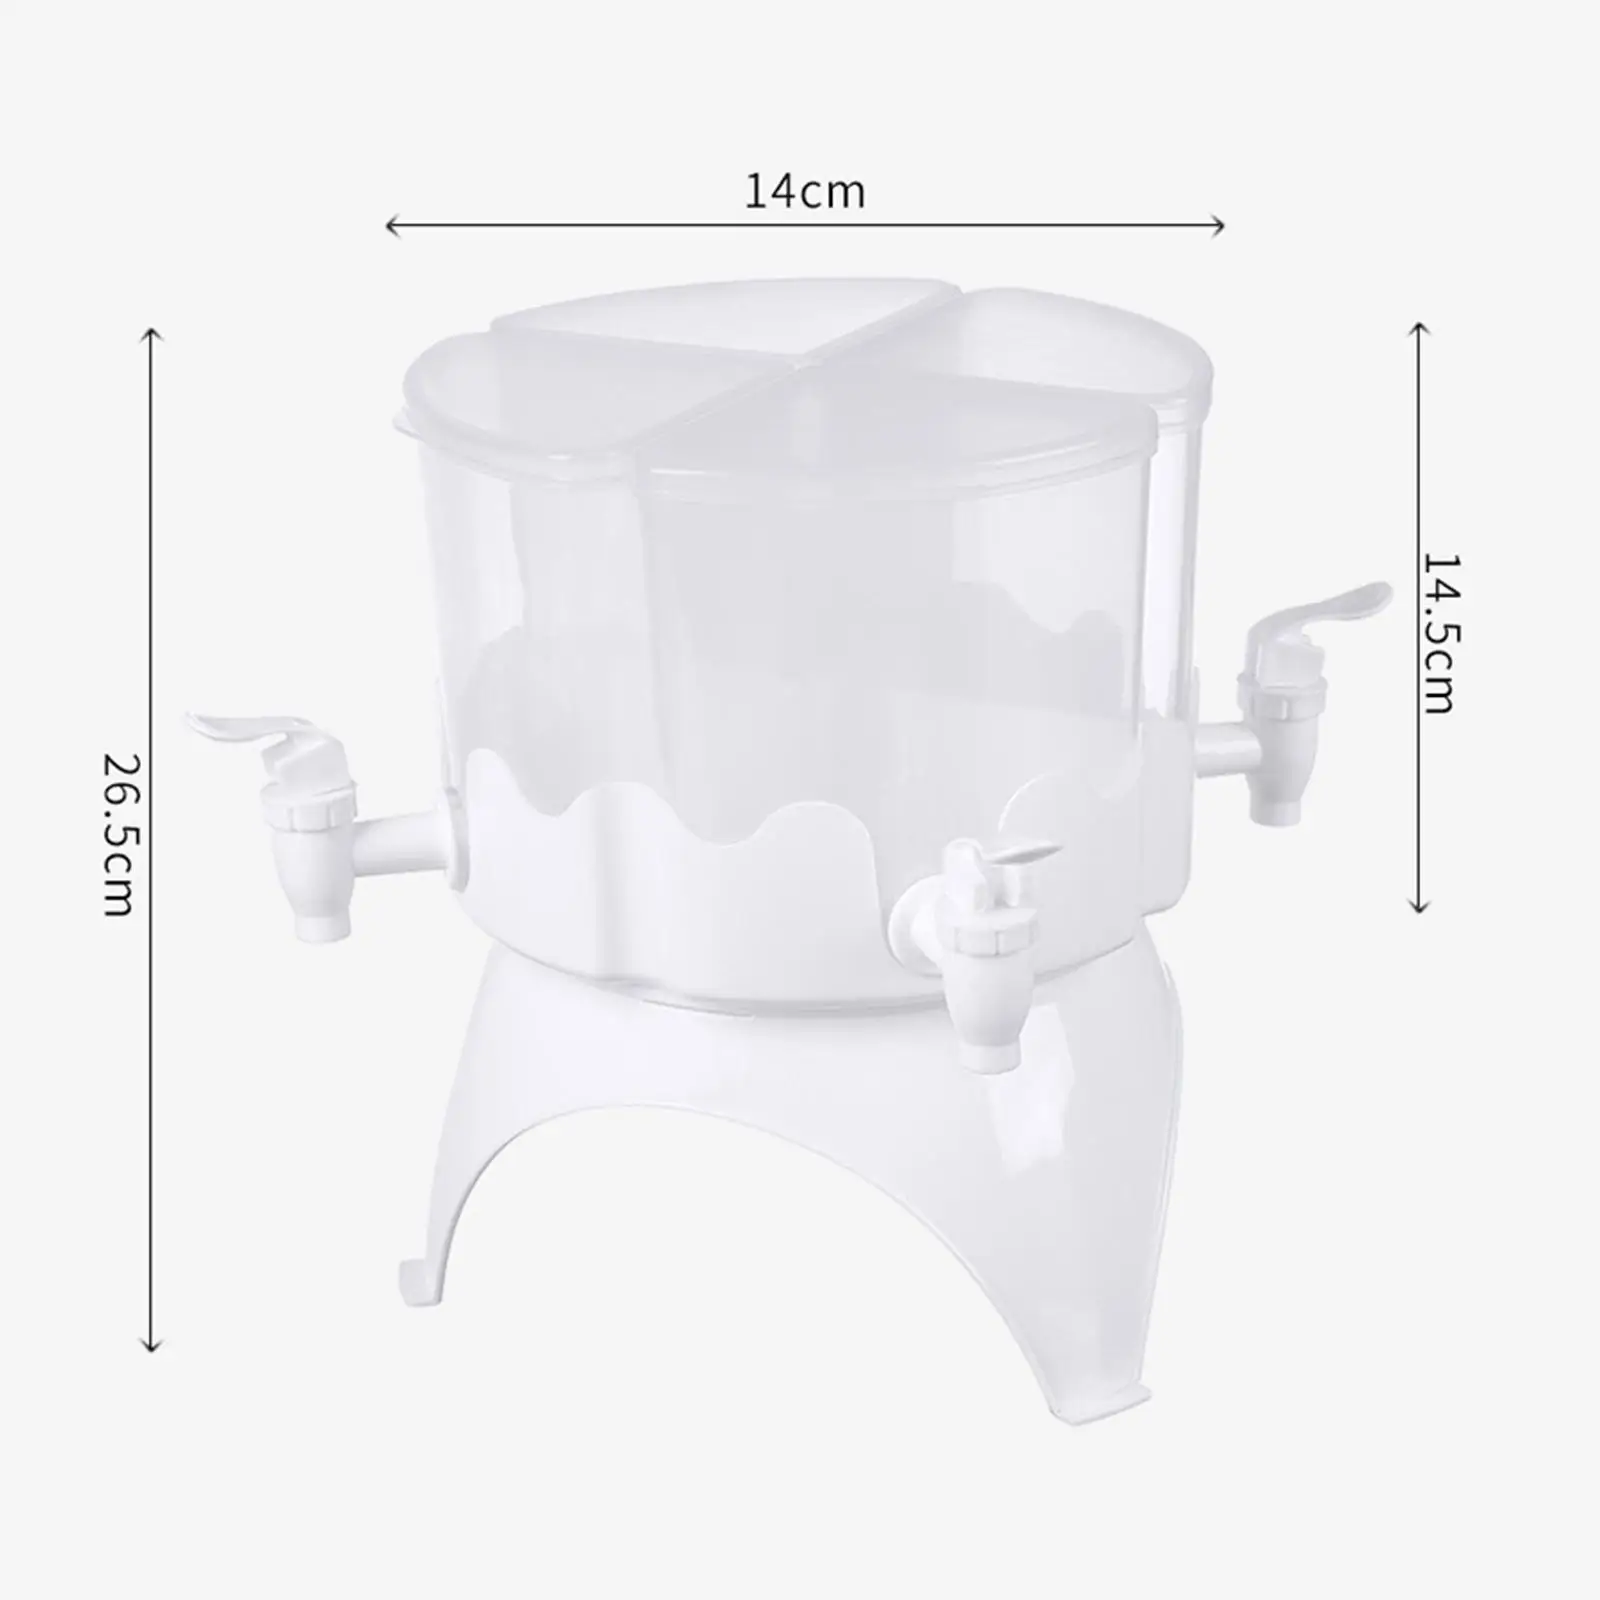 Water Jug with Faucet Water Jug Dispenser Drink Dispenser Large Capacity Water Bottle for Home Fridge Wedding Outdoor Party Bar